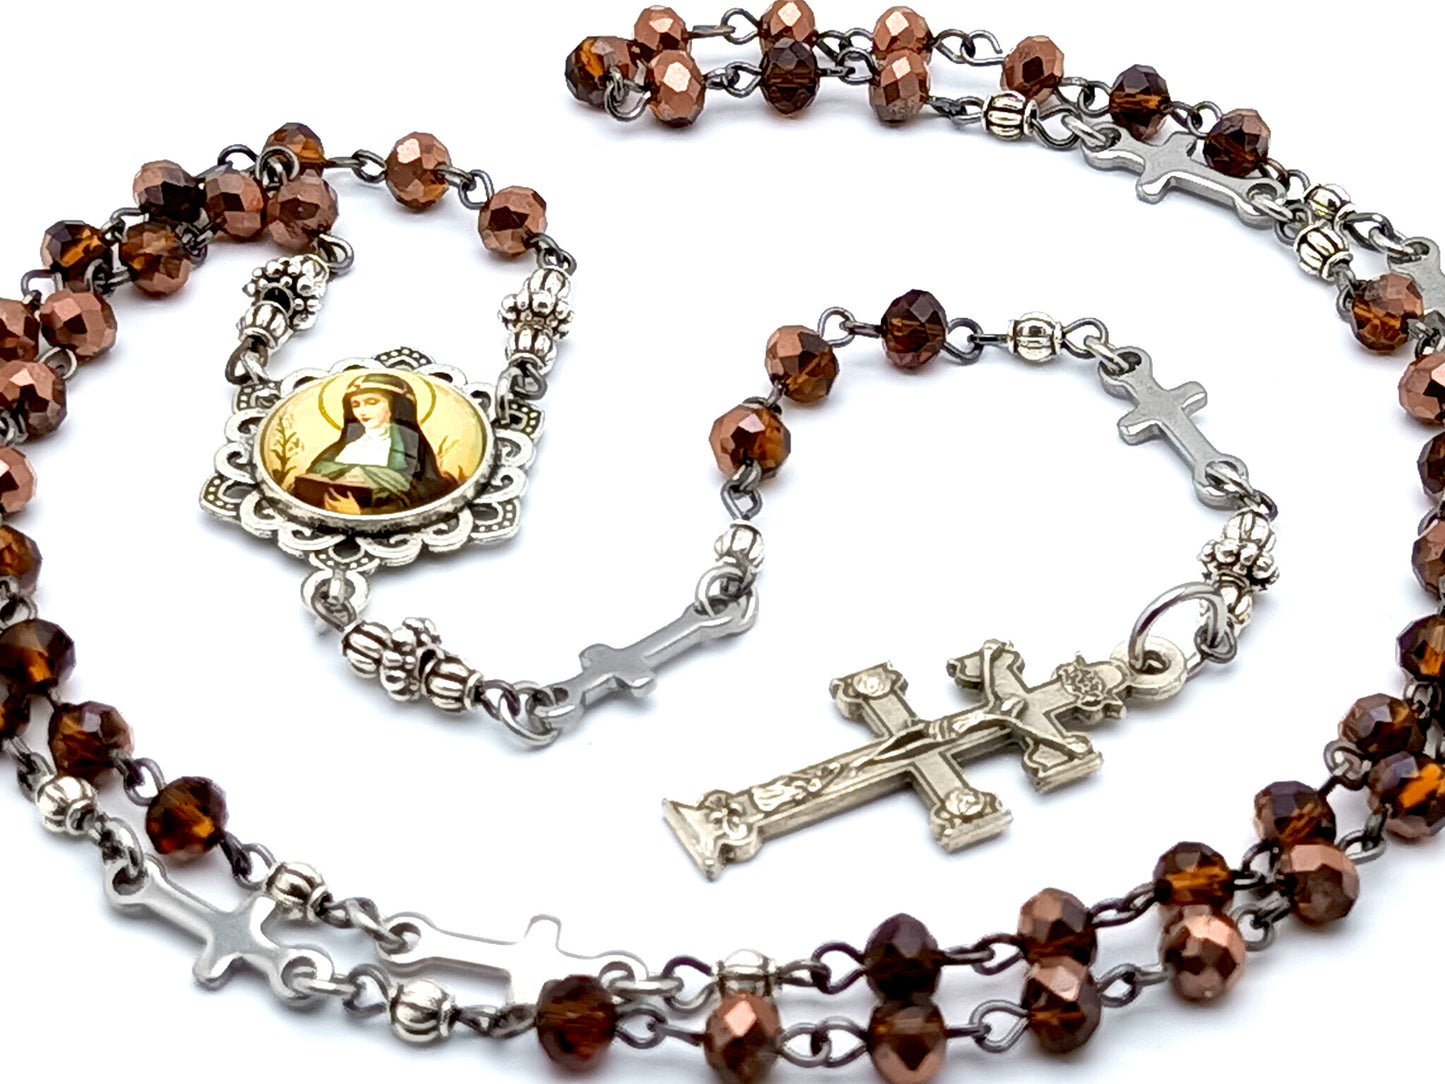 Saint Teresa of Avila unique rosary beads with glass and stainless steel linking cross beads and Caravaca crucifix.